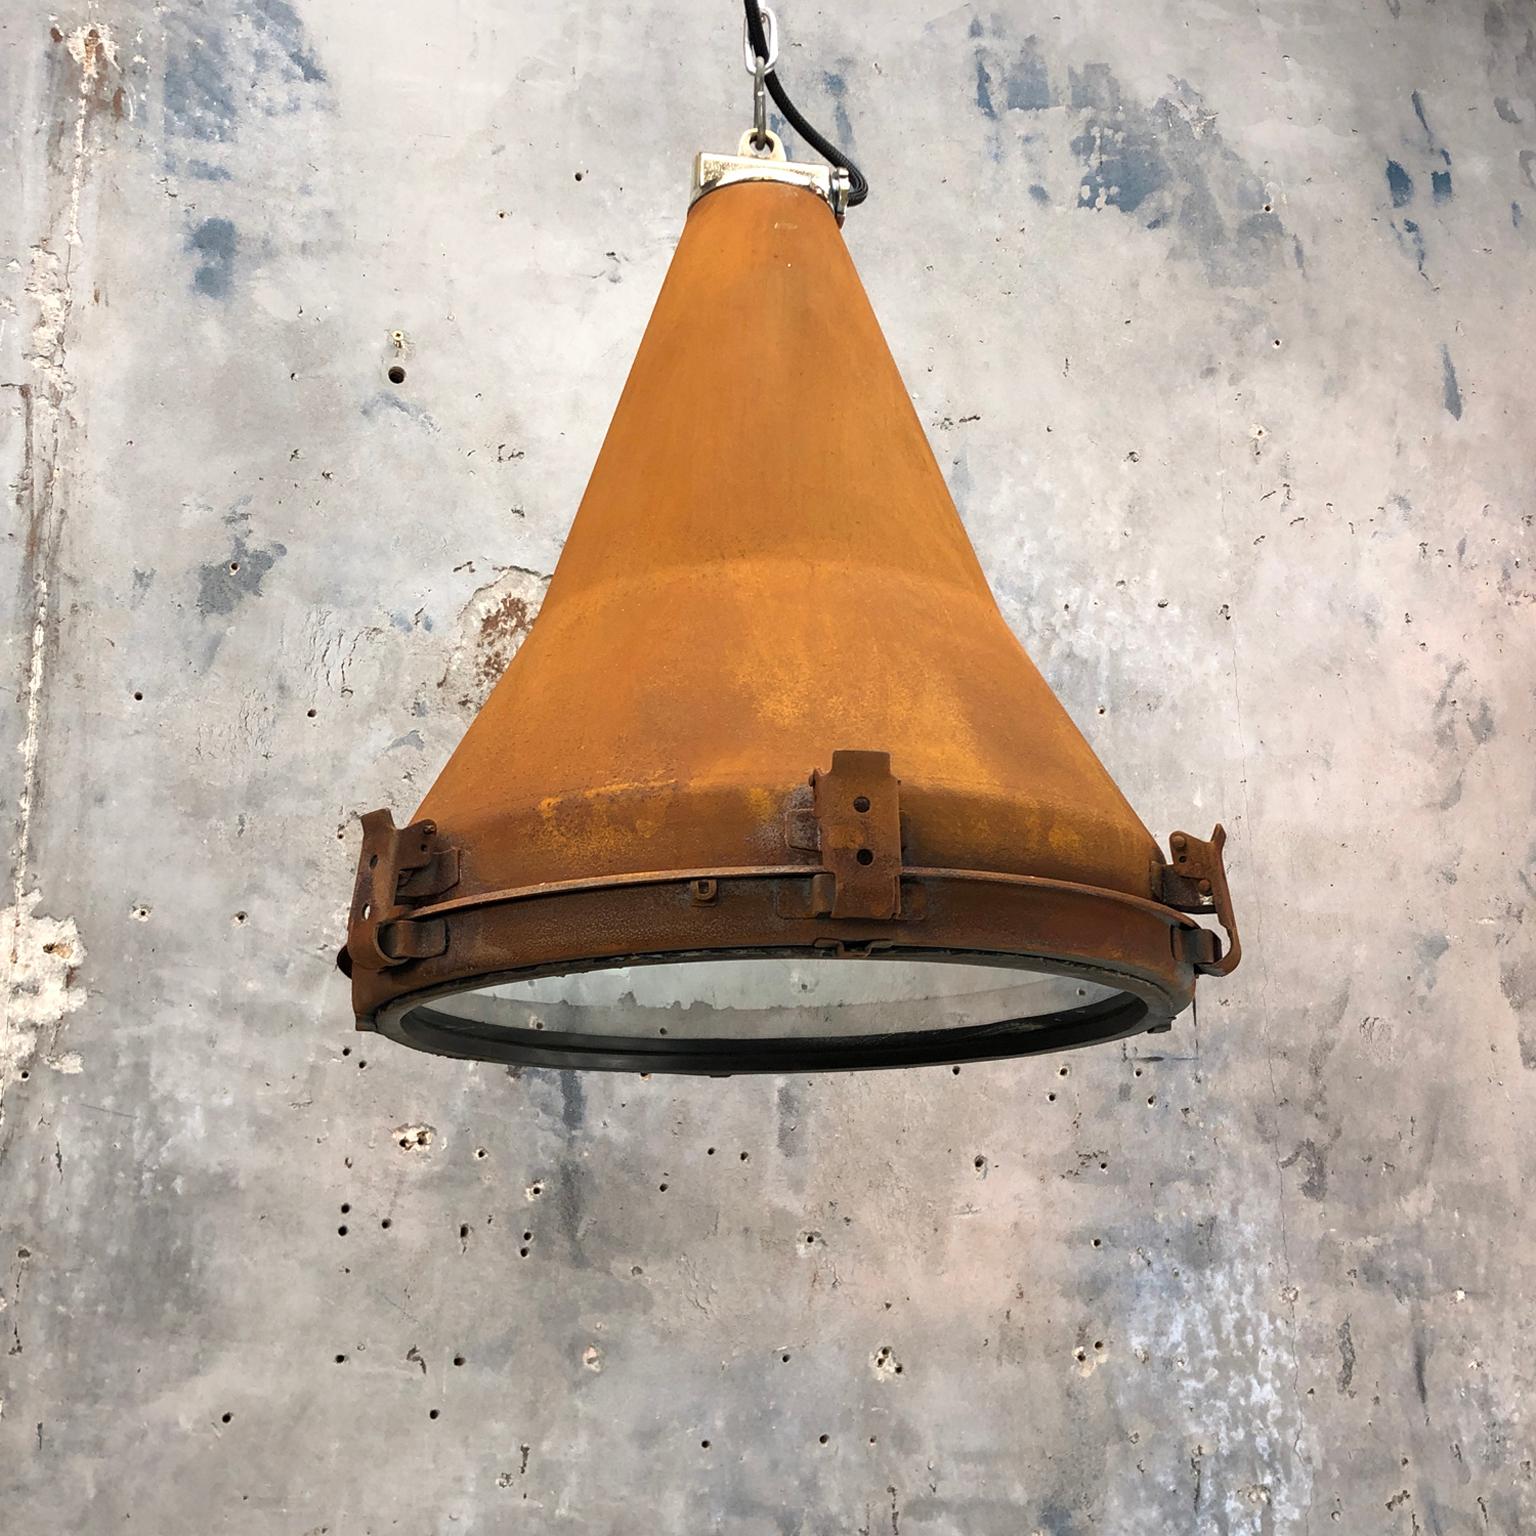 Brass 1970s Korean Vintage Industrial Steel Conical Pendant Light with Applied Rust